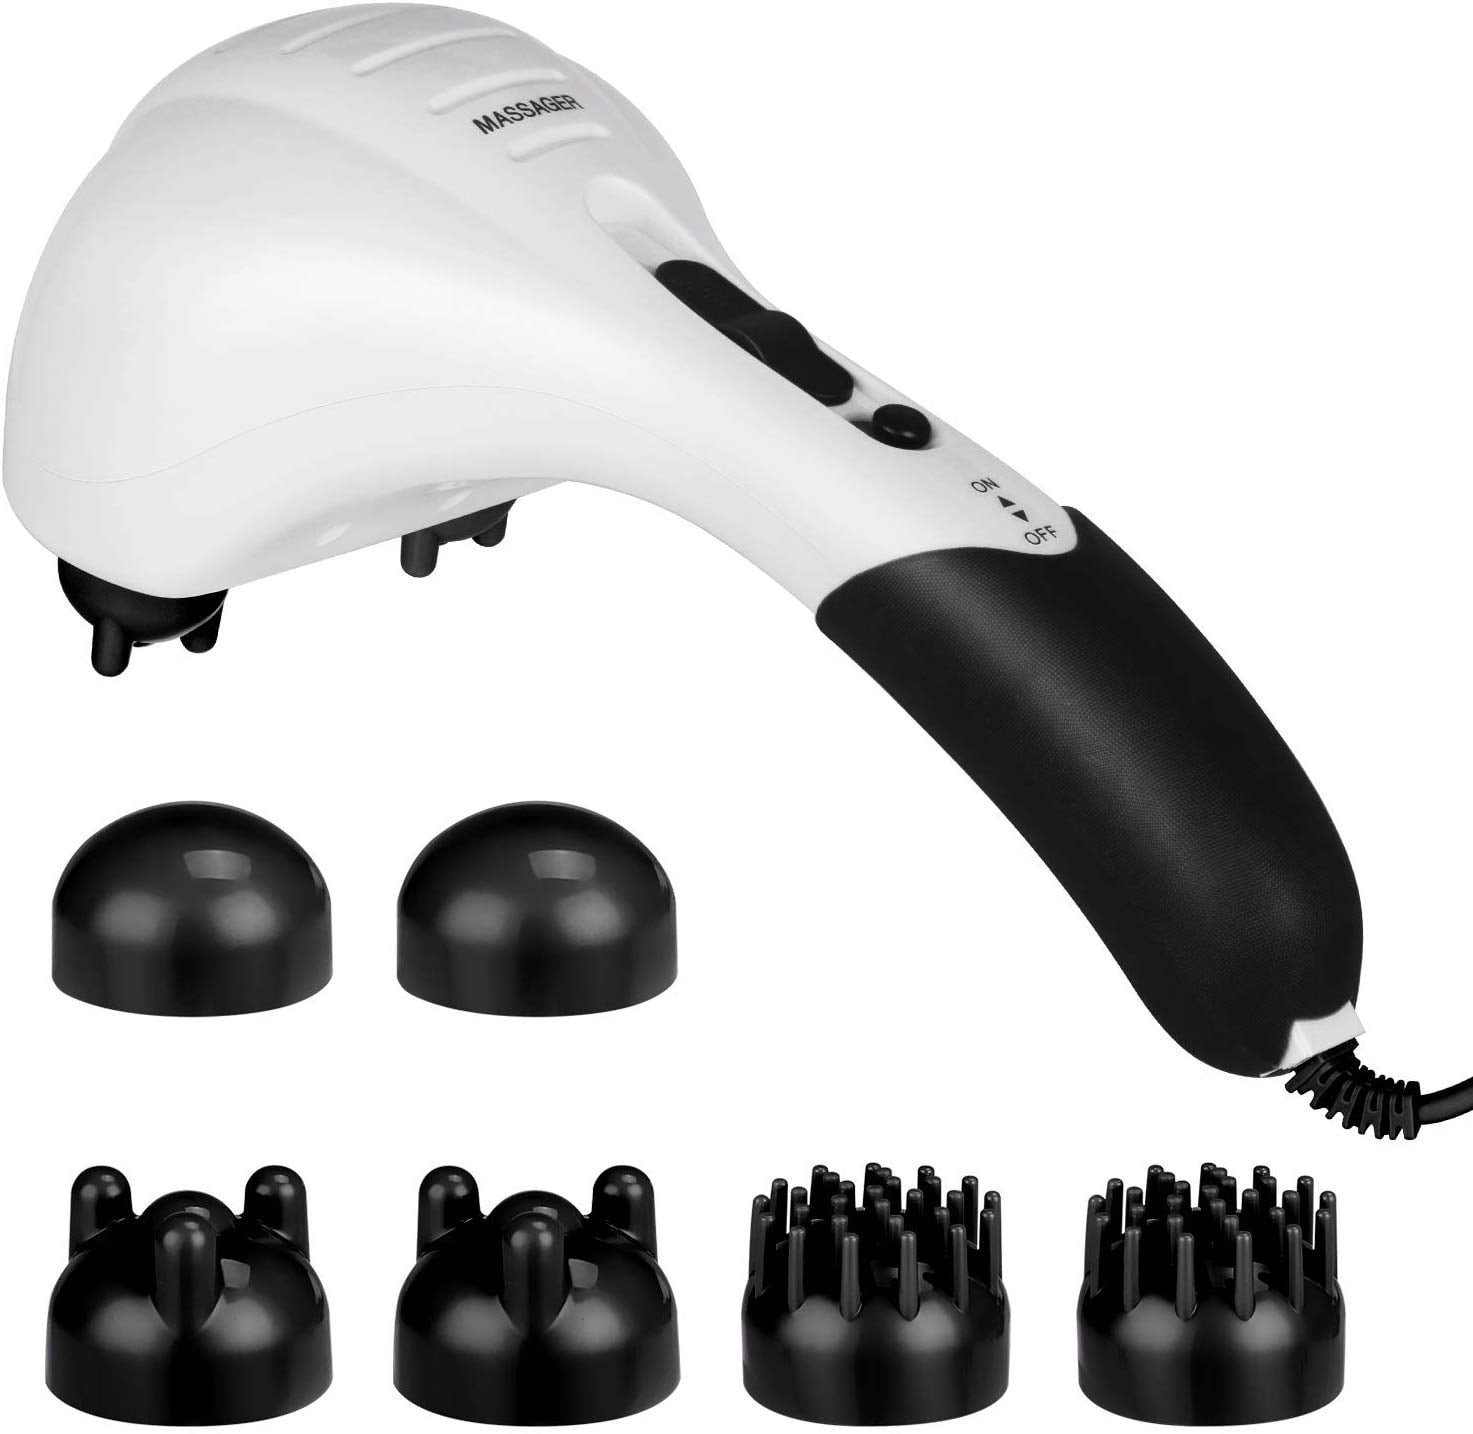 Handheld Neck Back Massager Double Head Electric Full Body Massager